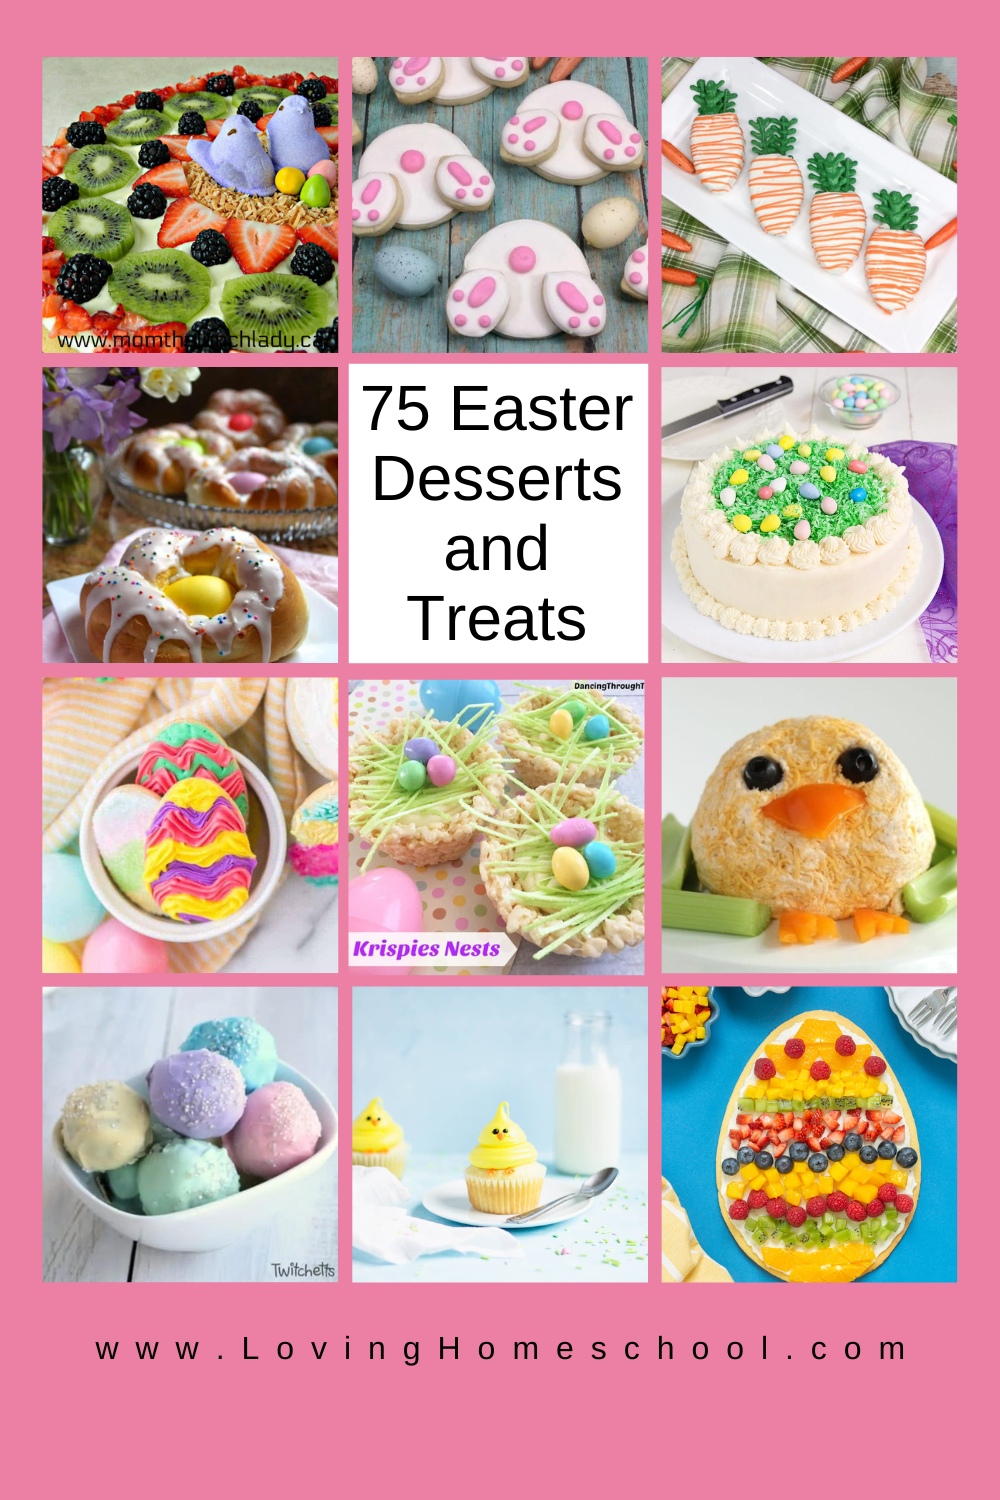 75 Easter Desserts and Treats Pinterest Pin